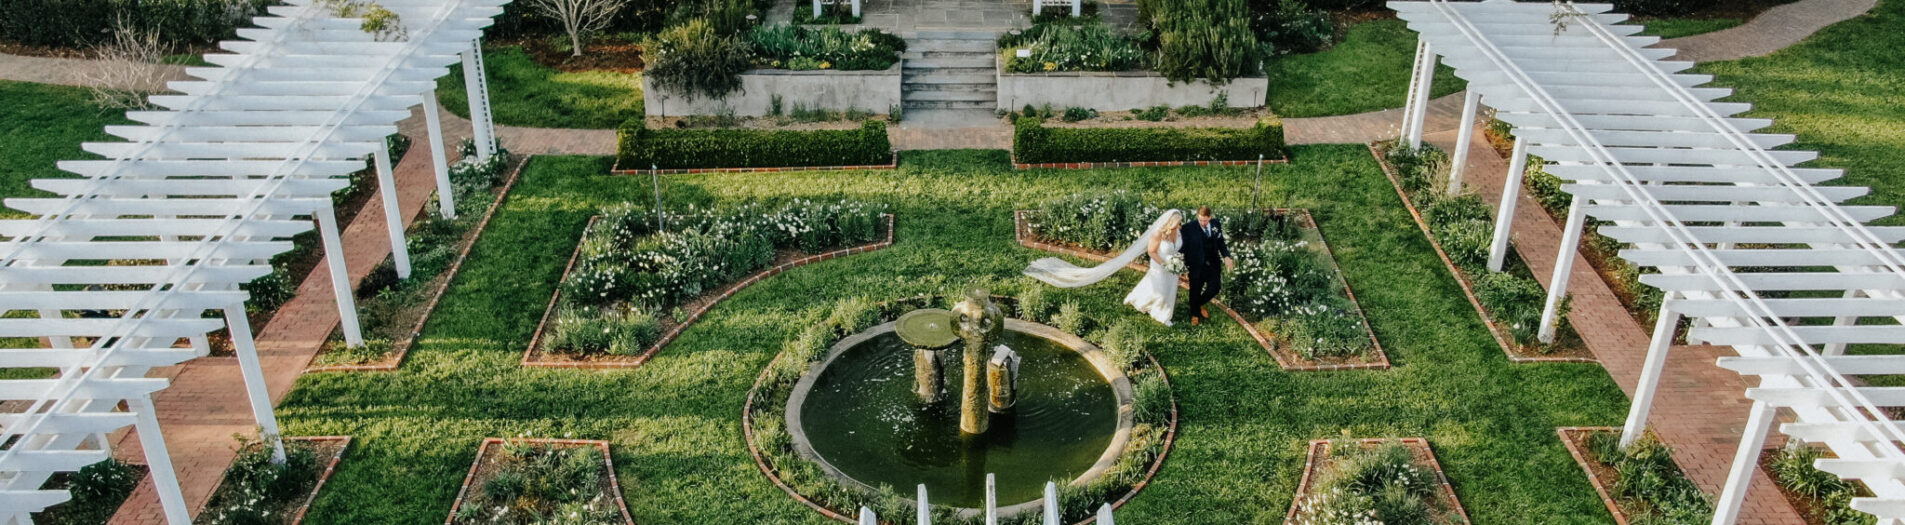 Heavenly Drone Wedding Videography + Photography Add-On | Michelle Elyse Photography